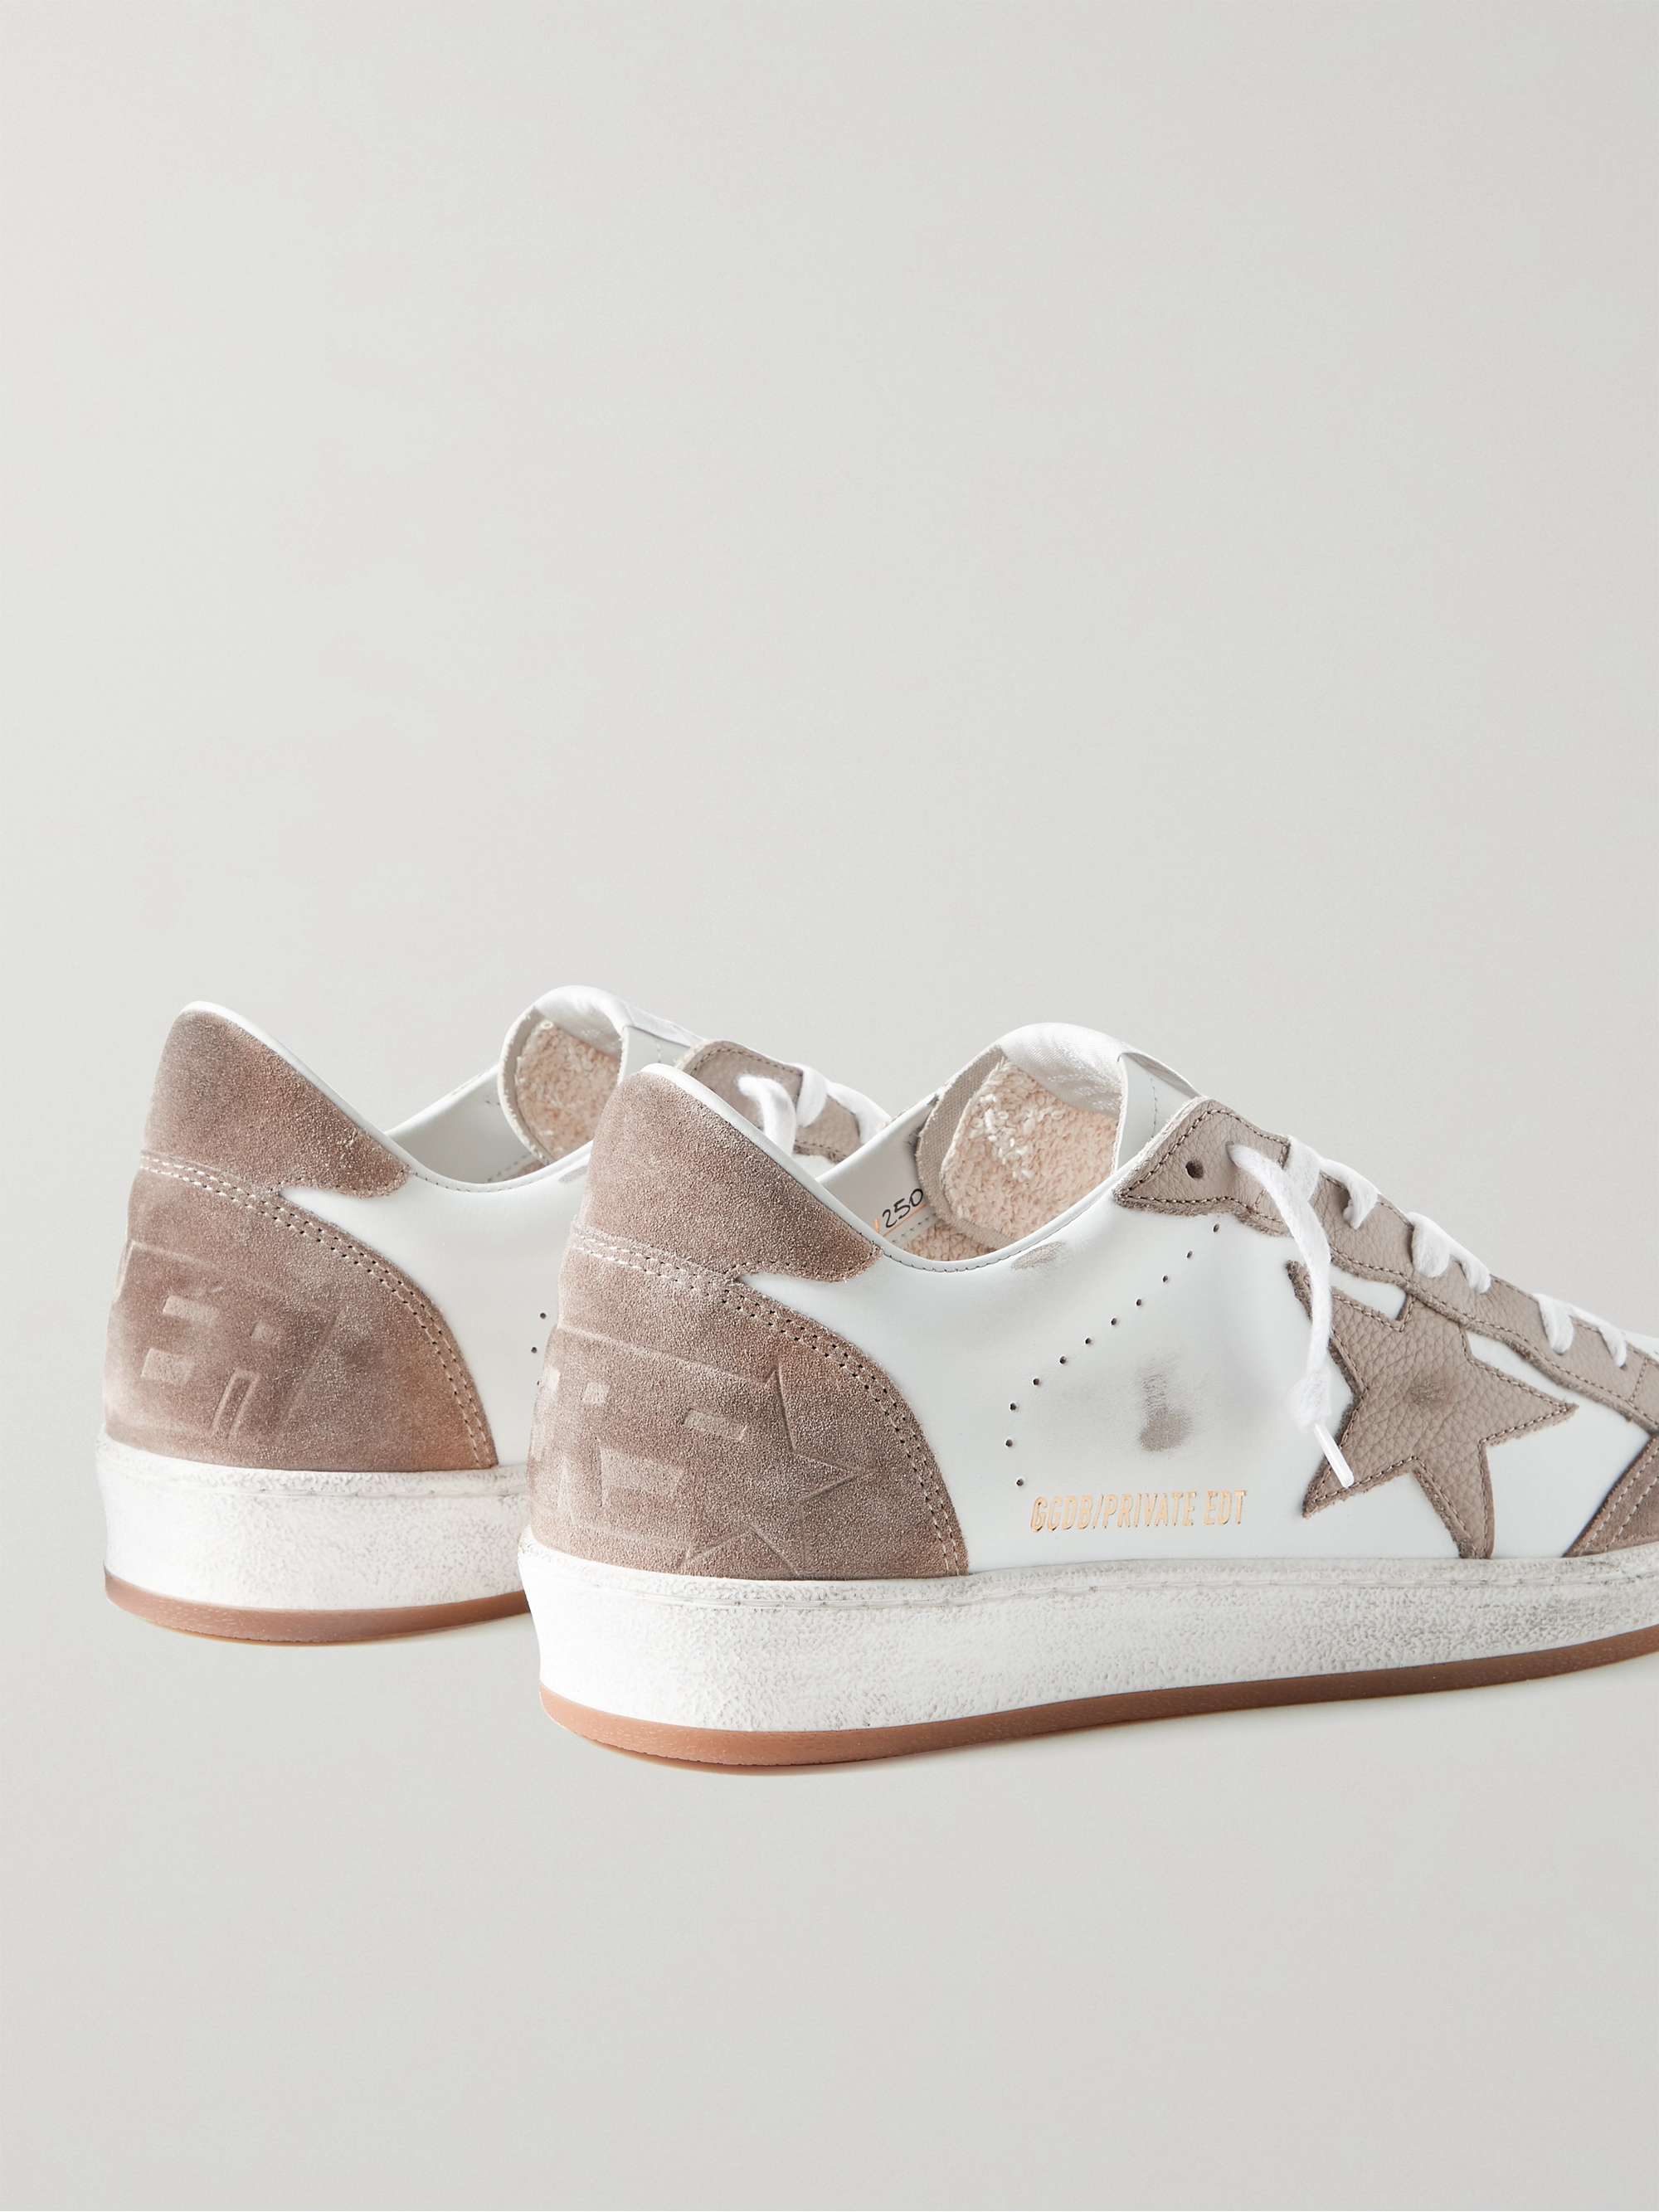 GOLDEN GOOSE Ballstar Distressed Leather and Suede Sneakers